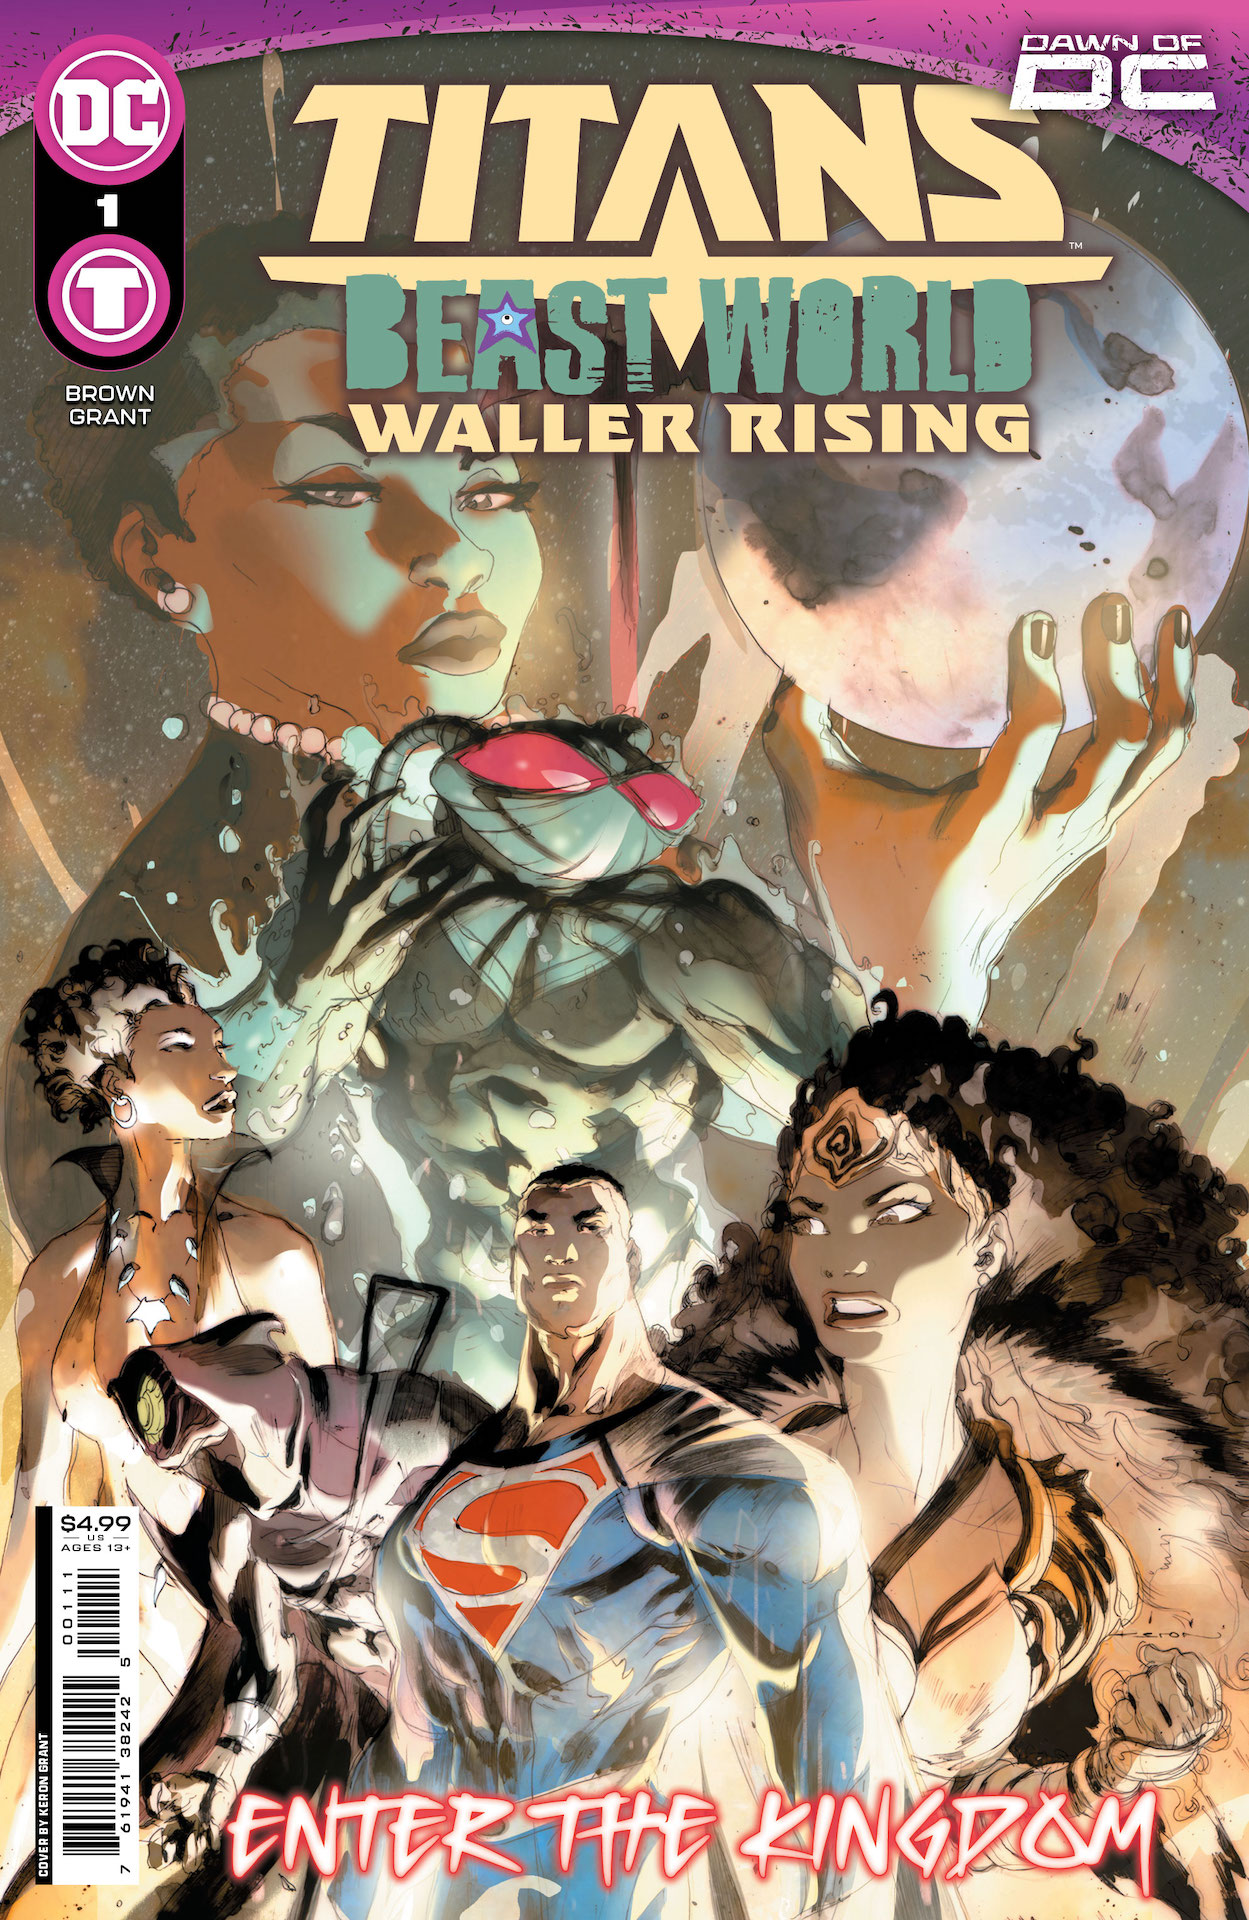 DC Preview: Titans: Beast World - Waller Rising #1